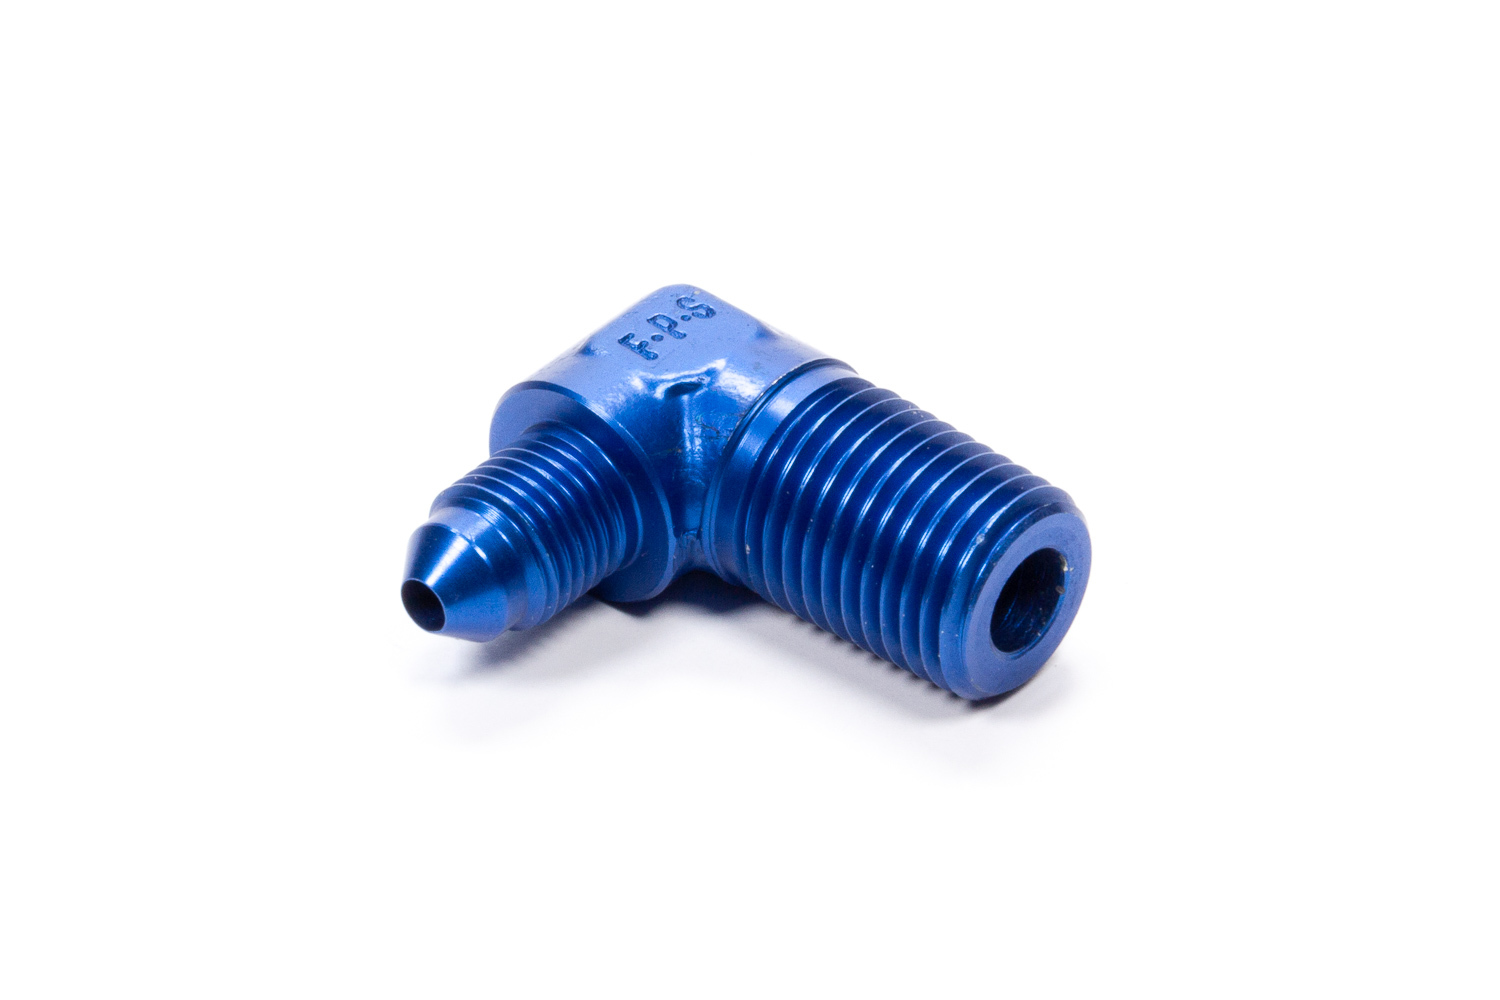 Fragola 482238 Fitting, Adapter, 90 Degree, 4 AN Male to 3/8 in NPT Male, Aluminum, Blue Anodized, Each